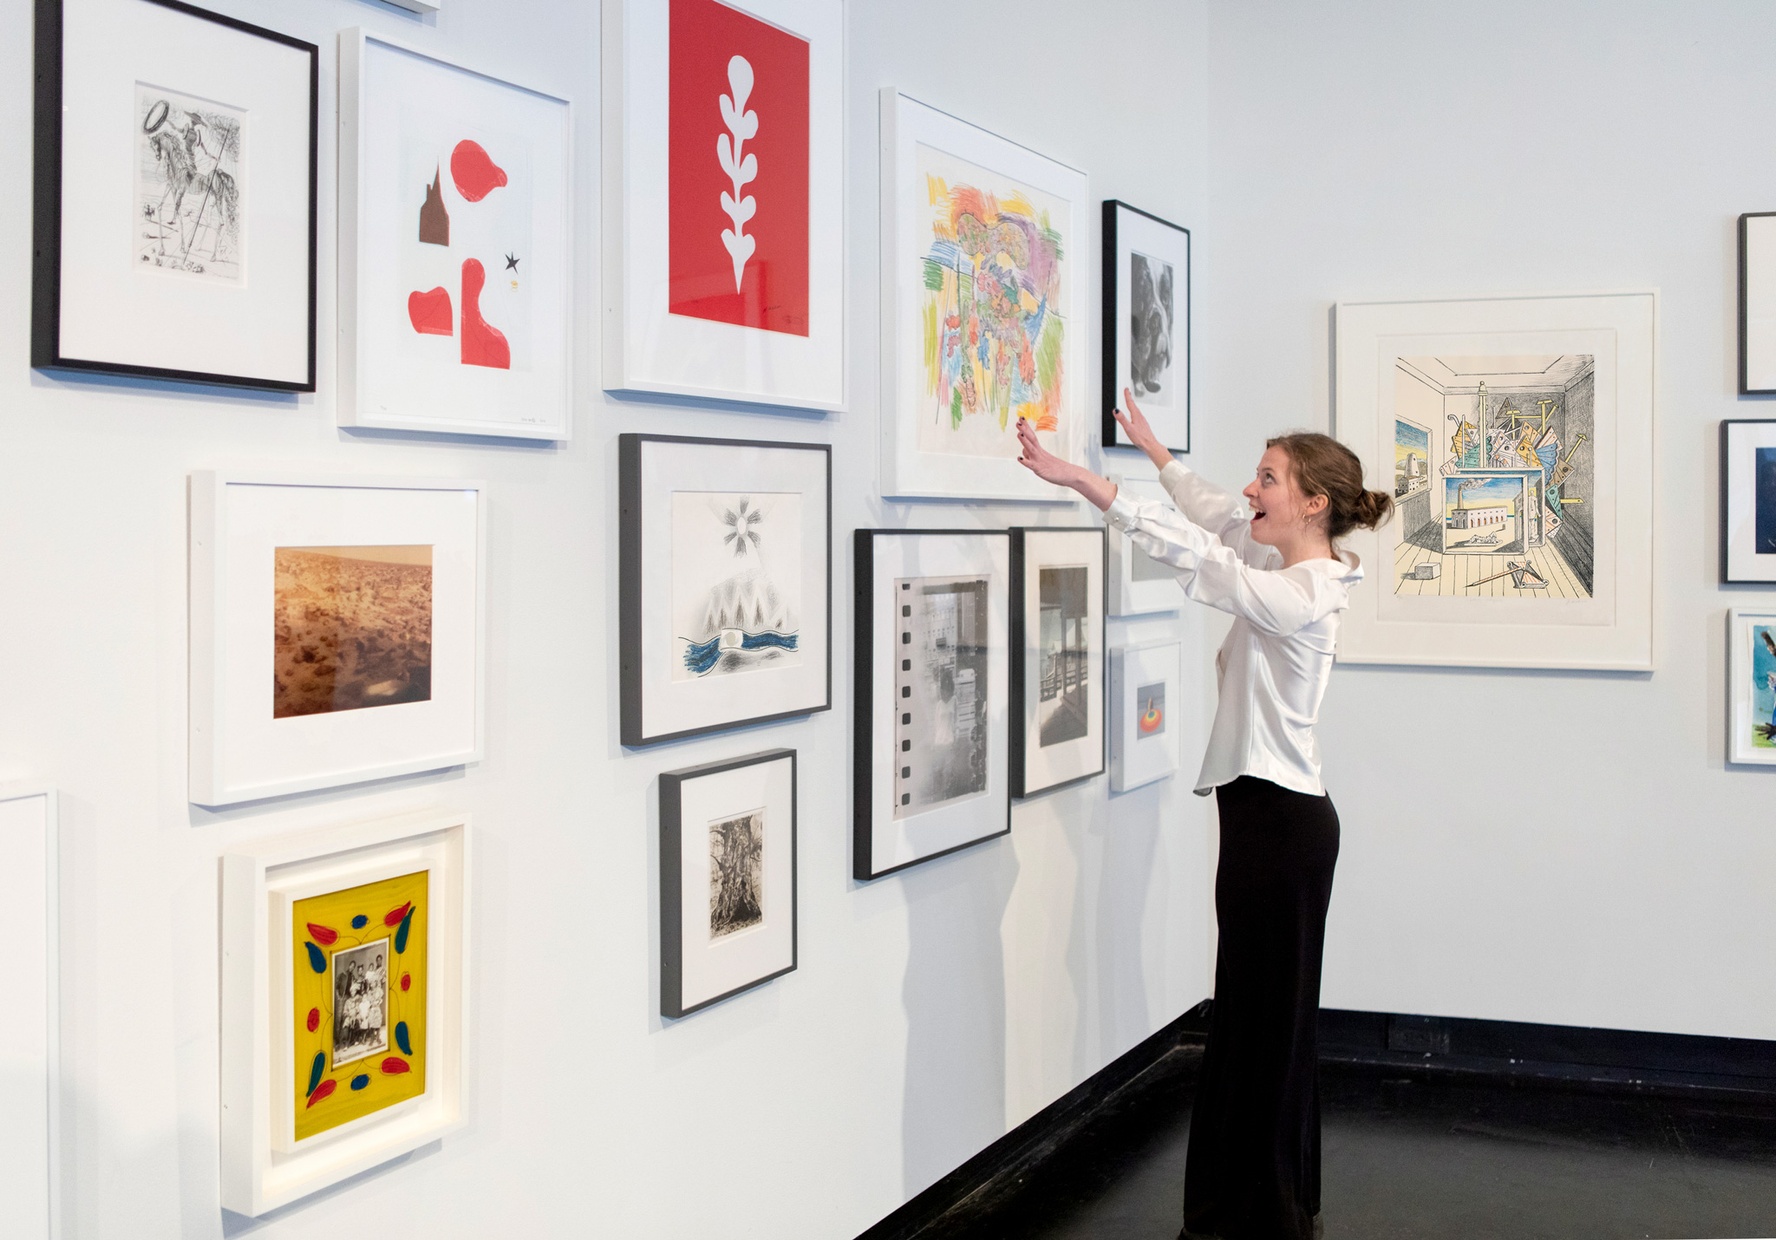 A student stands smiling in front of a wall of framed artwork with her hands reached out towards a large print by Carroll Dunham.